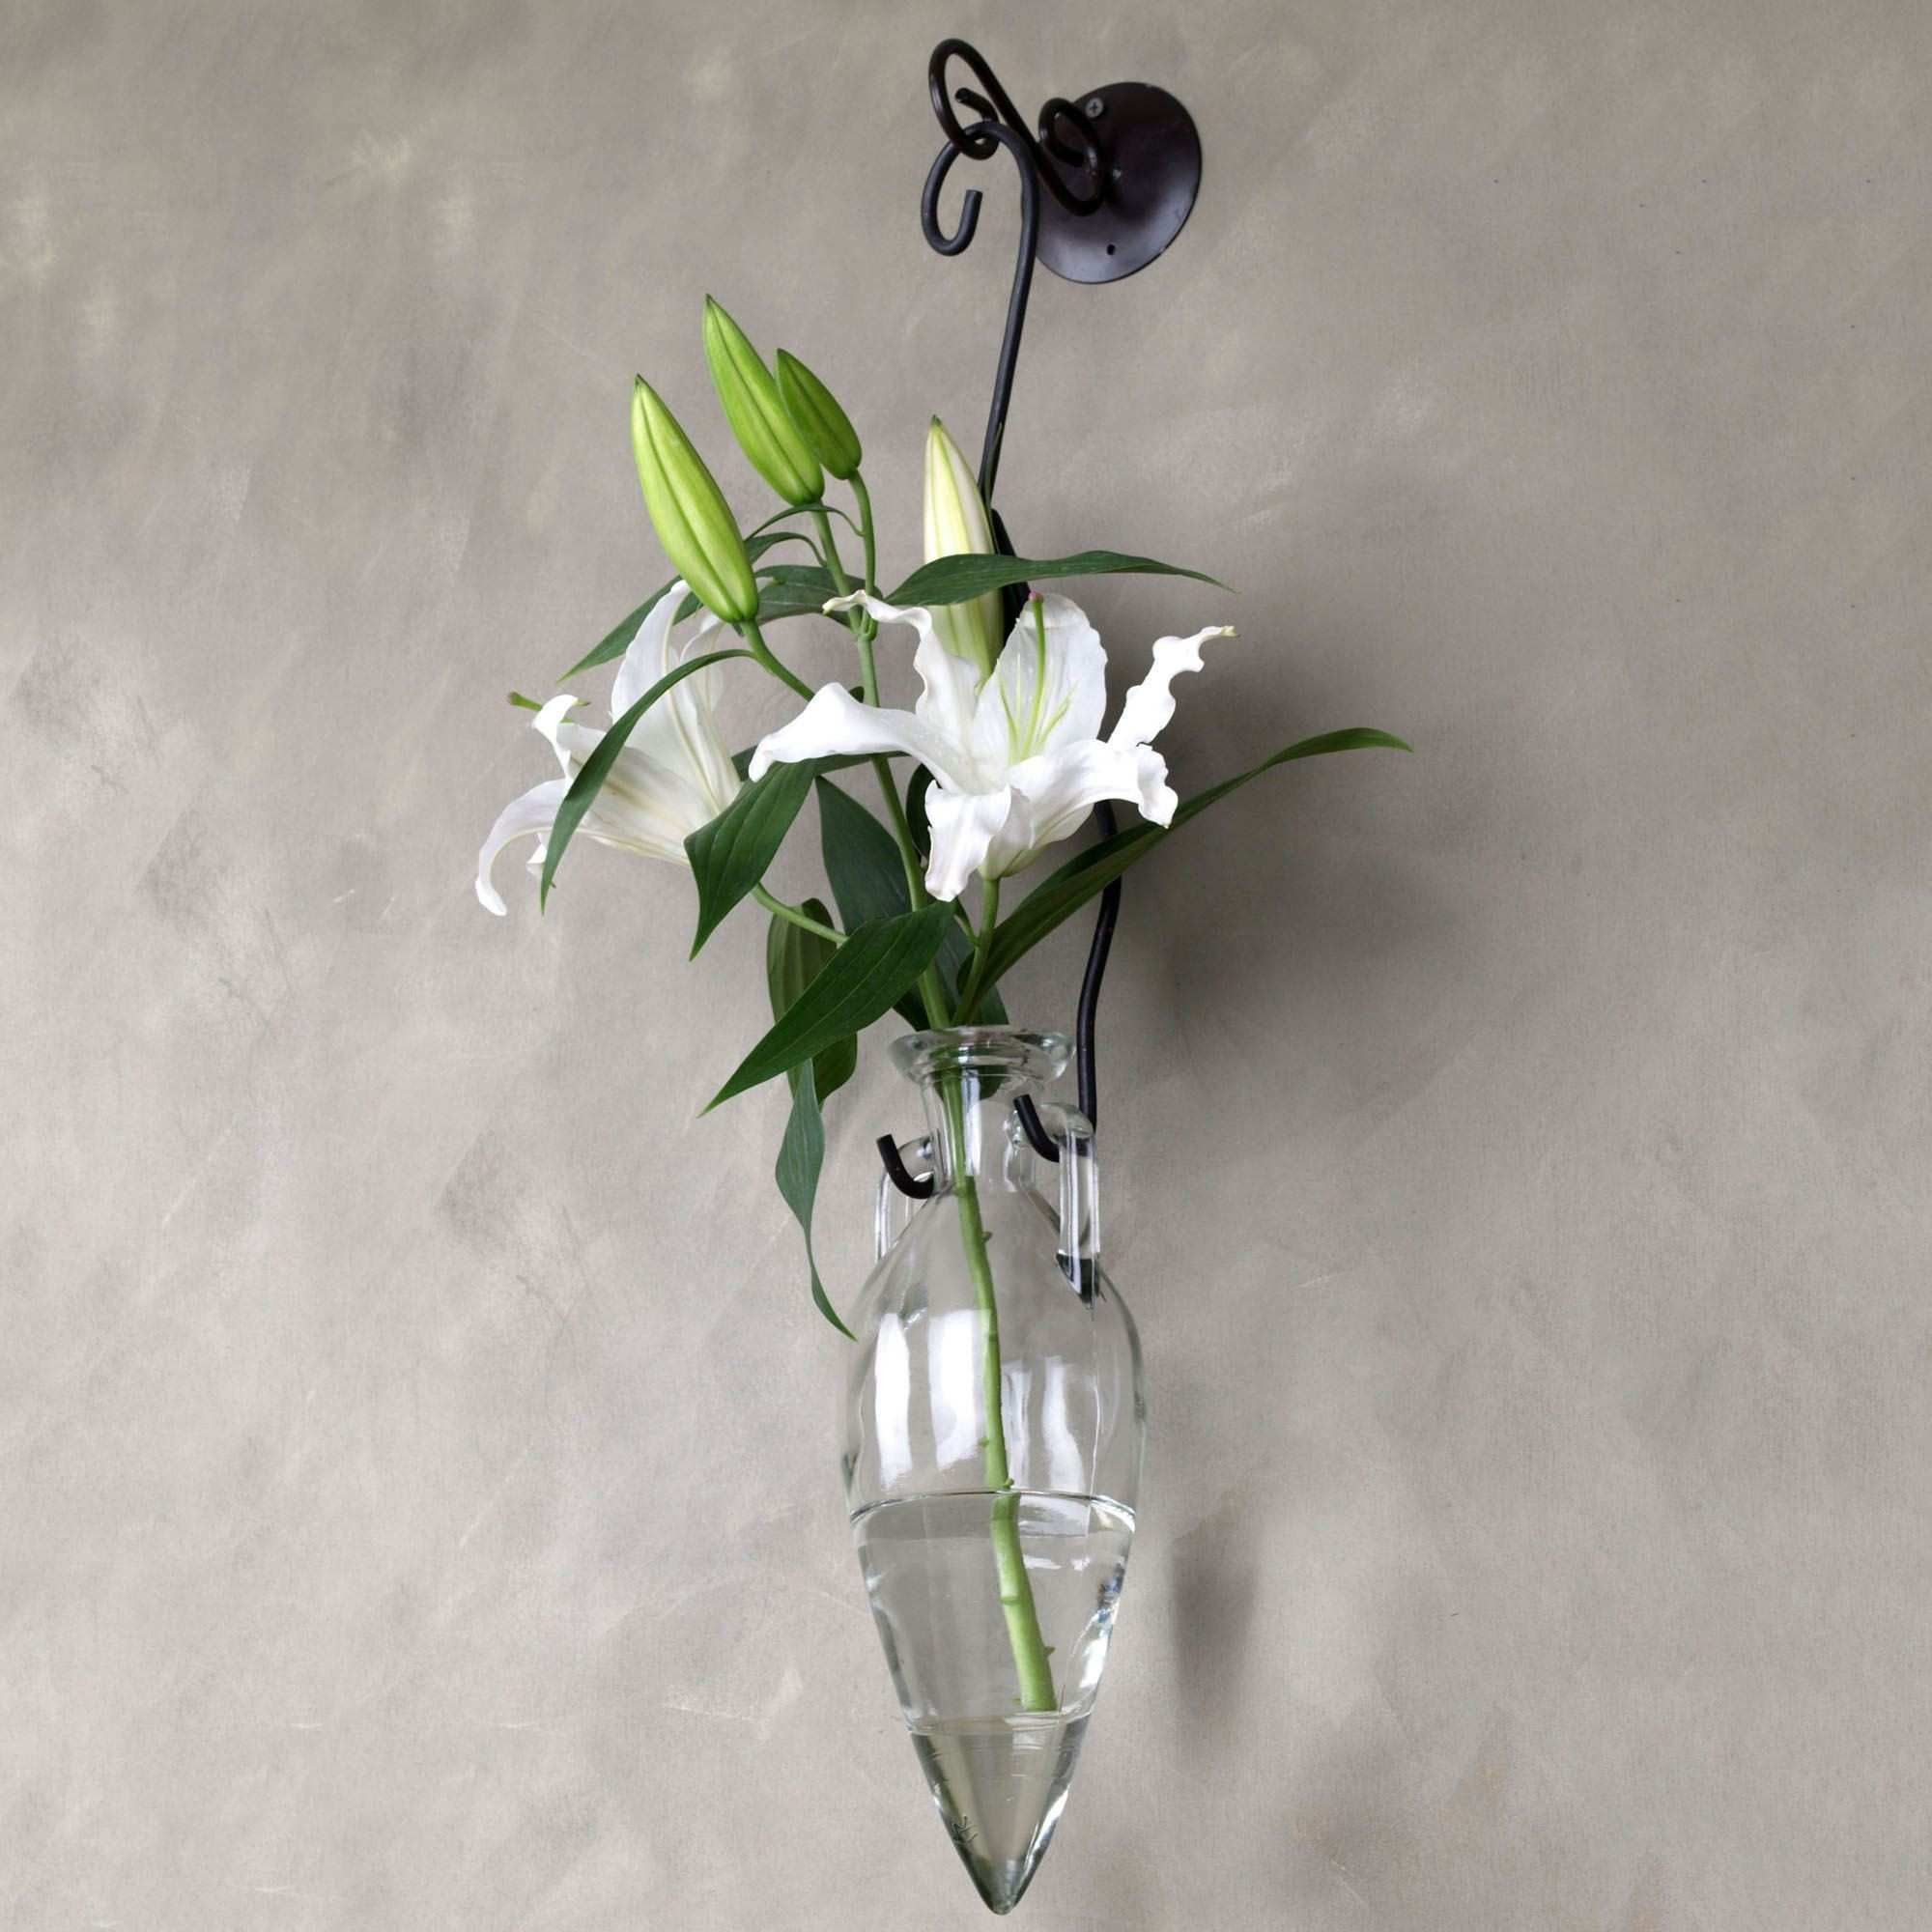 28 Unique 3d Puzzle Vase 2024 free download 3d puzzle vase of elegant star wars metal wall art wall art ideas pertaining to h vases wall hanging flower vase newspaper i 0d scheme wall scheme